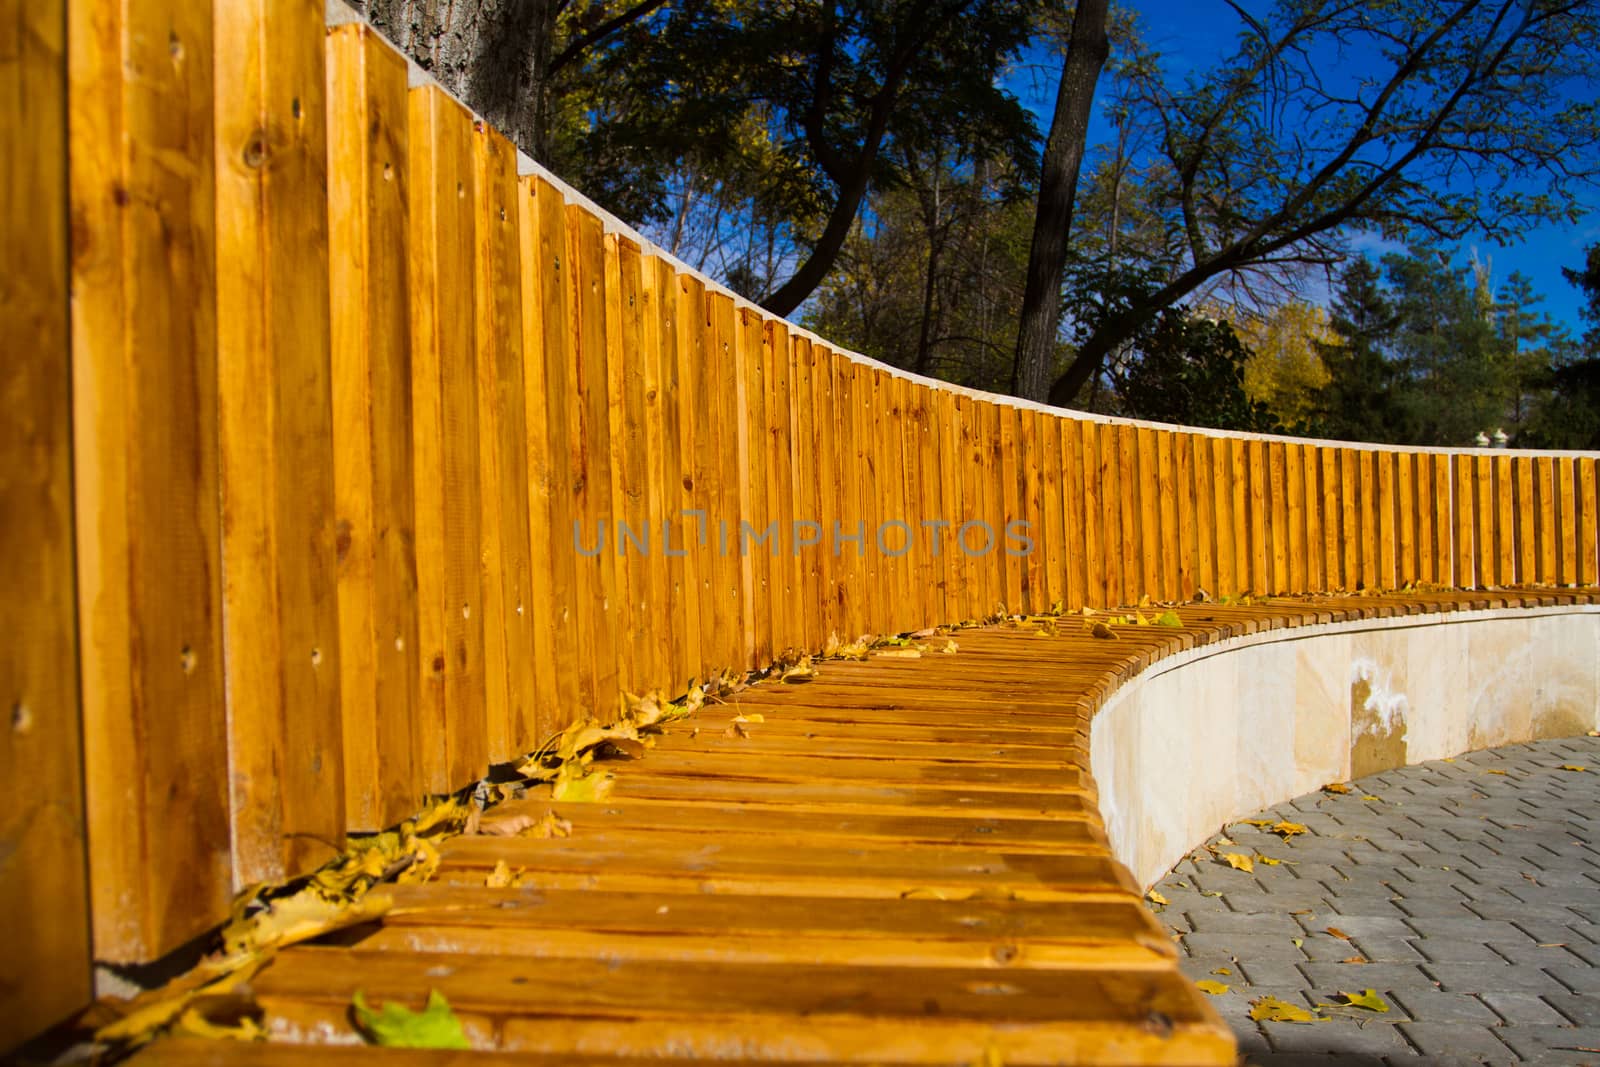 Large wooden bench in autumn park - Stock Image